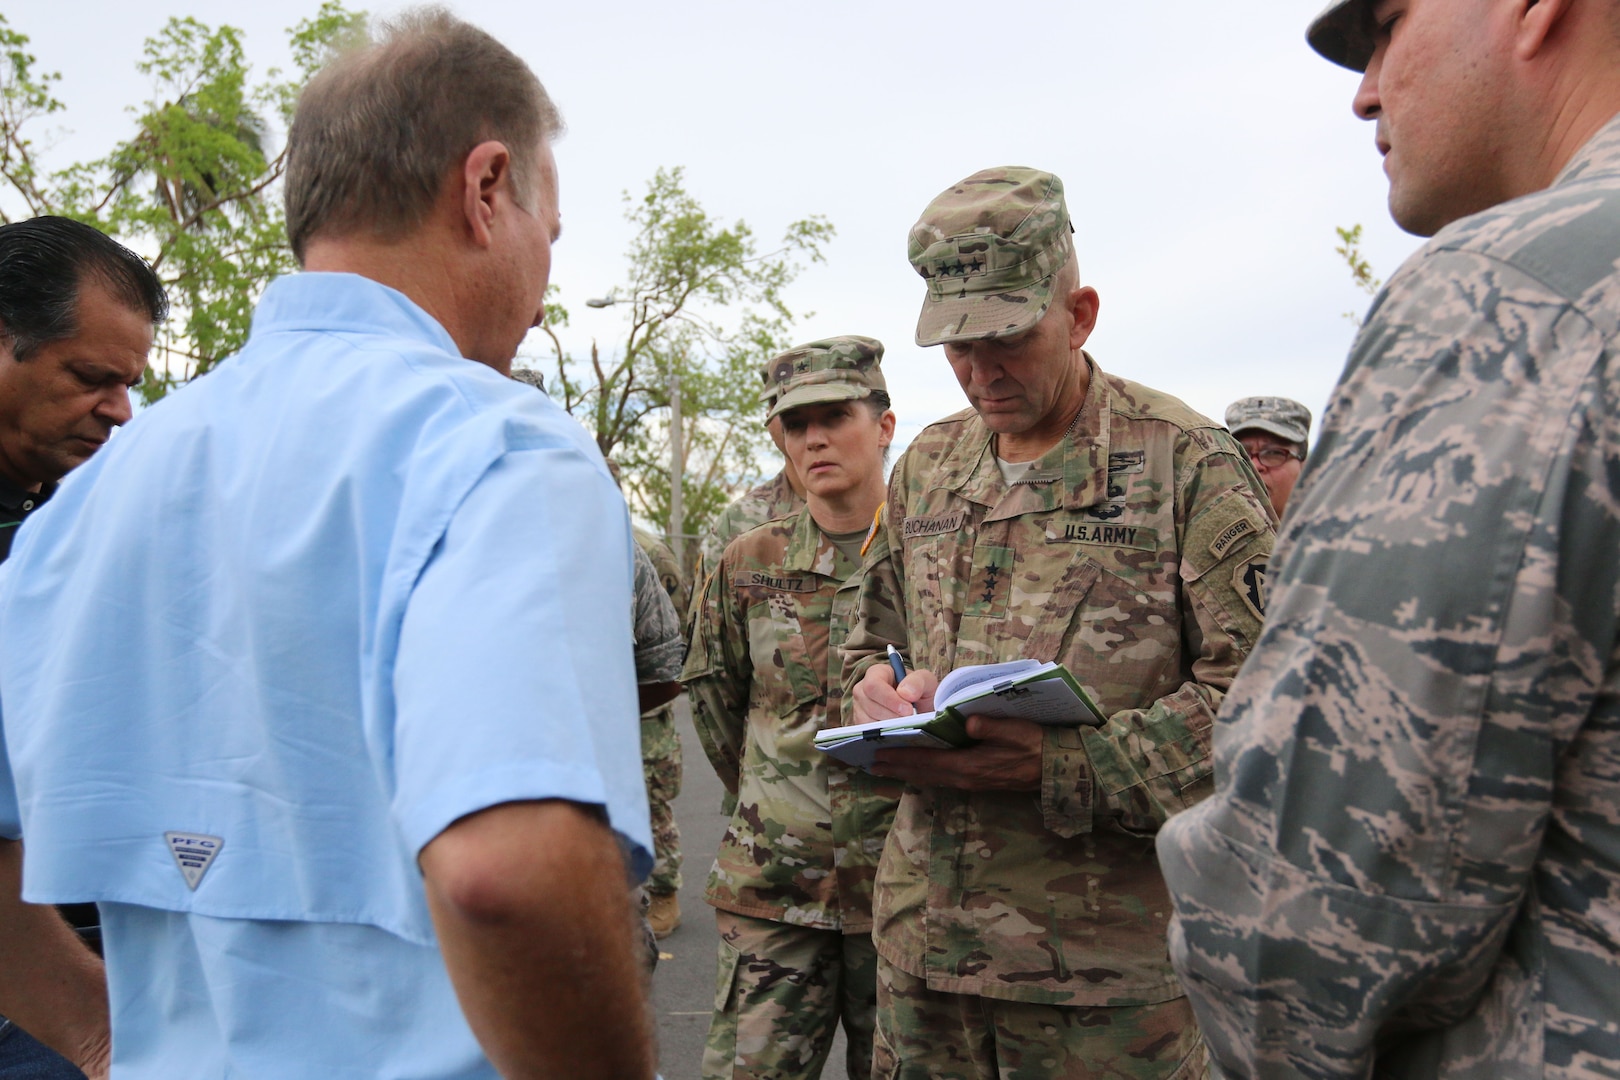 Lt. Gen. Jeffrey Buchanan, commanding general, Joint Force Land Component Command, visits Ramón Luis Rivera, Jr., the mayor of Bayamon, Puerto Rico, to assess the emergency relief efforts needed in Puerto Rico, Oct. 6, 2017. The Department of Defense is supporting the Federal Emergency Management Agency in helping those affected by Hurricane Maria to minimize suffering as part of the overall whole-of-government response efforts. Buchanan is commander of U.S. Army North (Fifth Army) at Joint Base San Antonio-Fort Sam Houston.